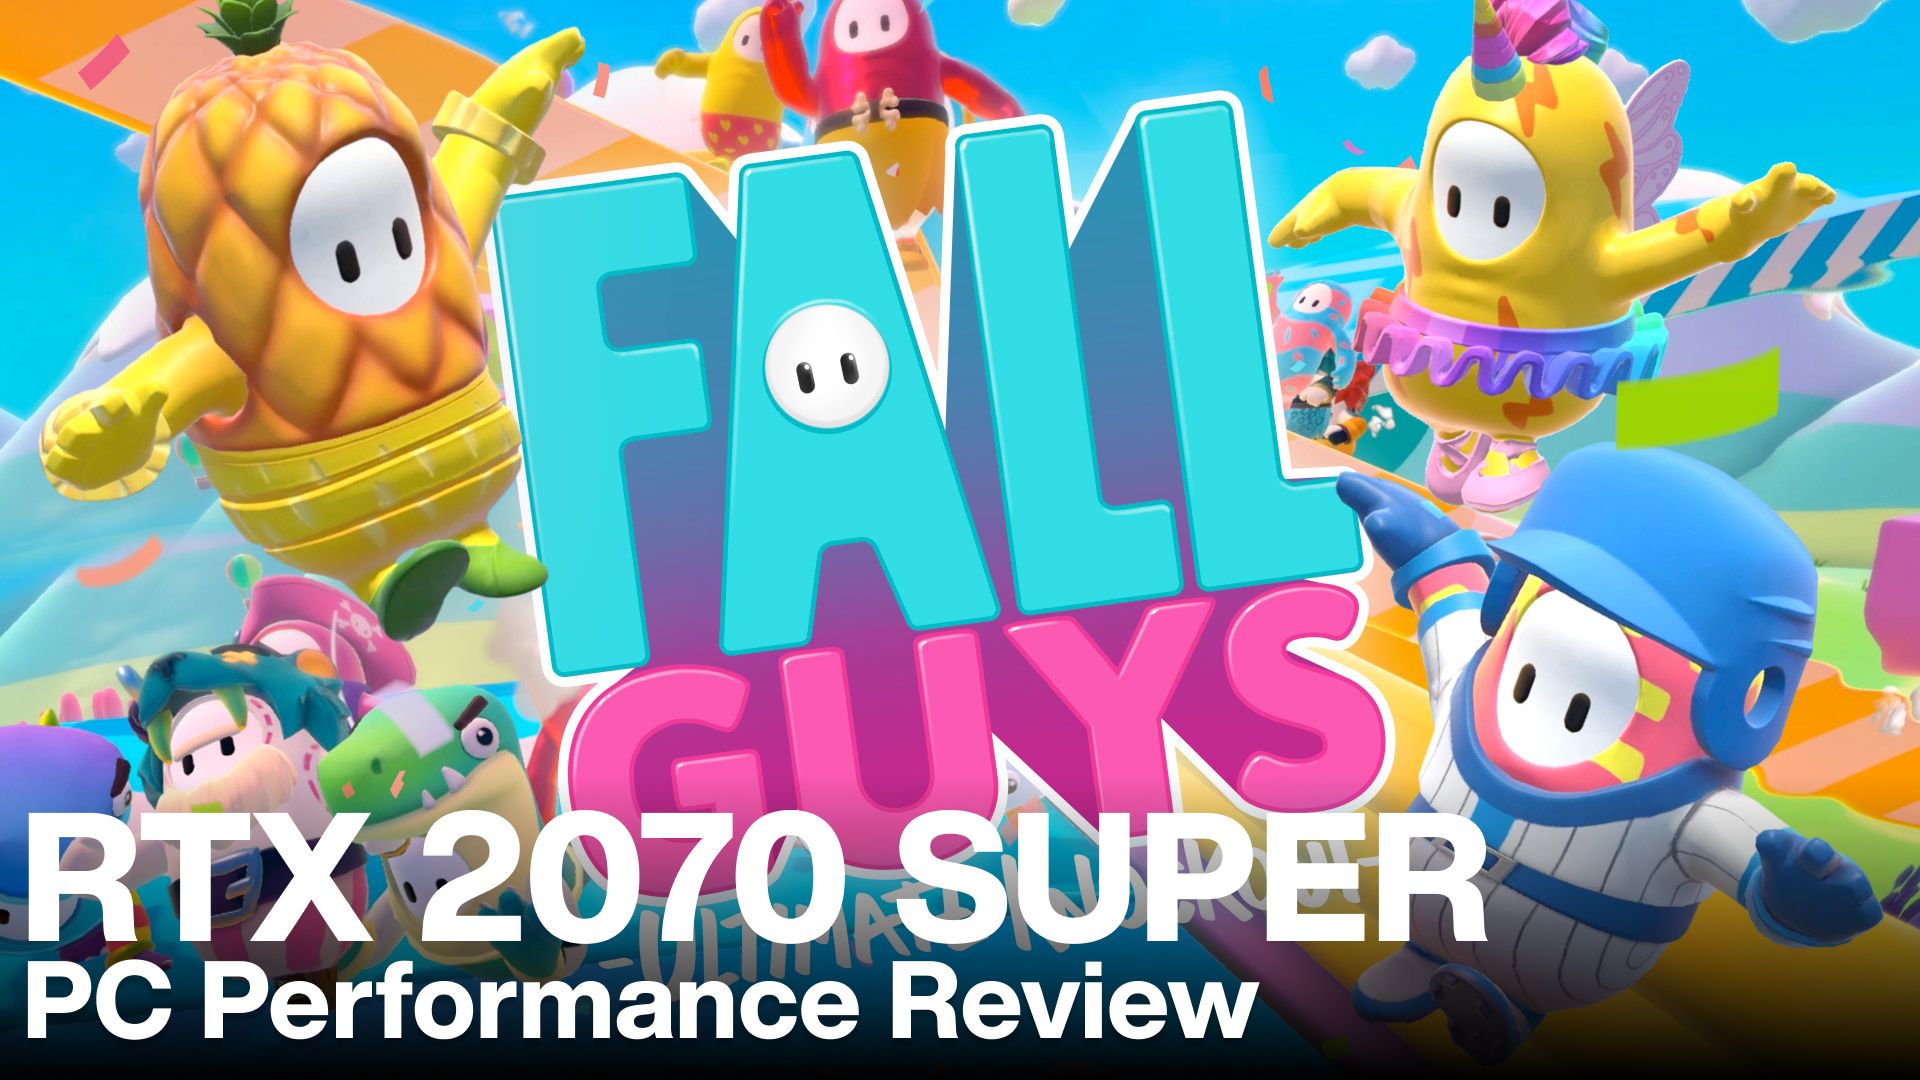 Fall Guys is Lots of Fun (and Runs Great on PC, of Course)